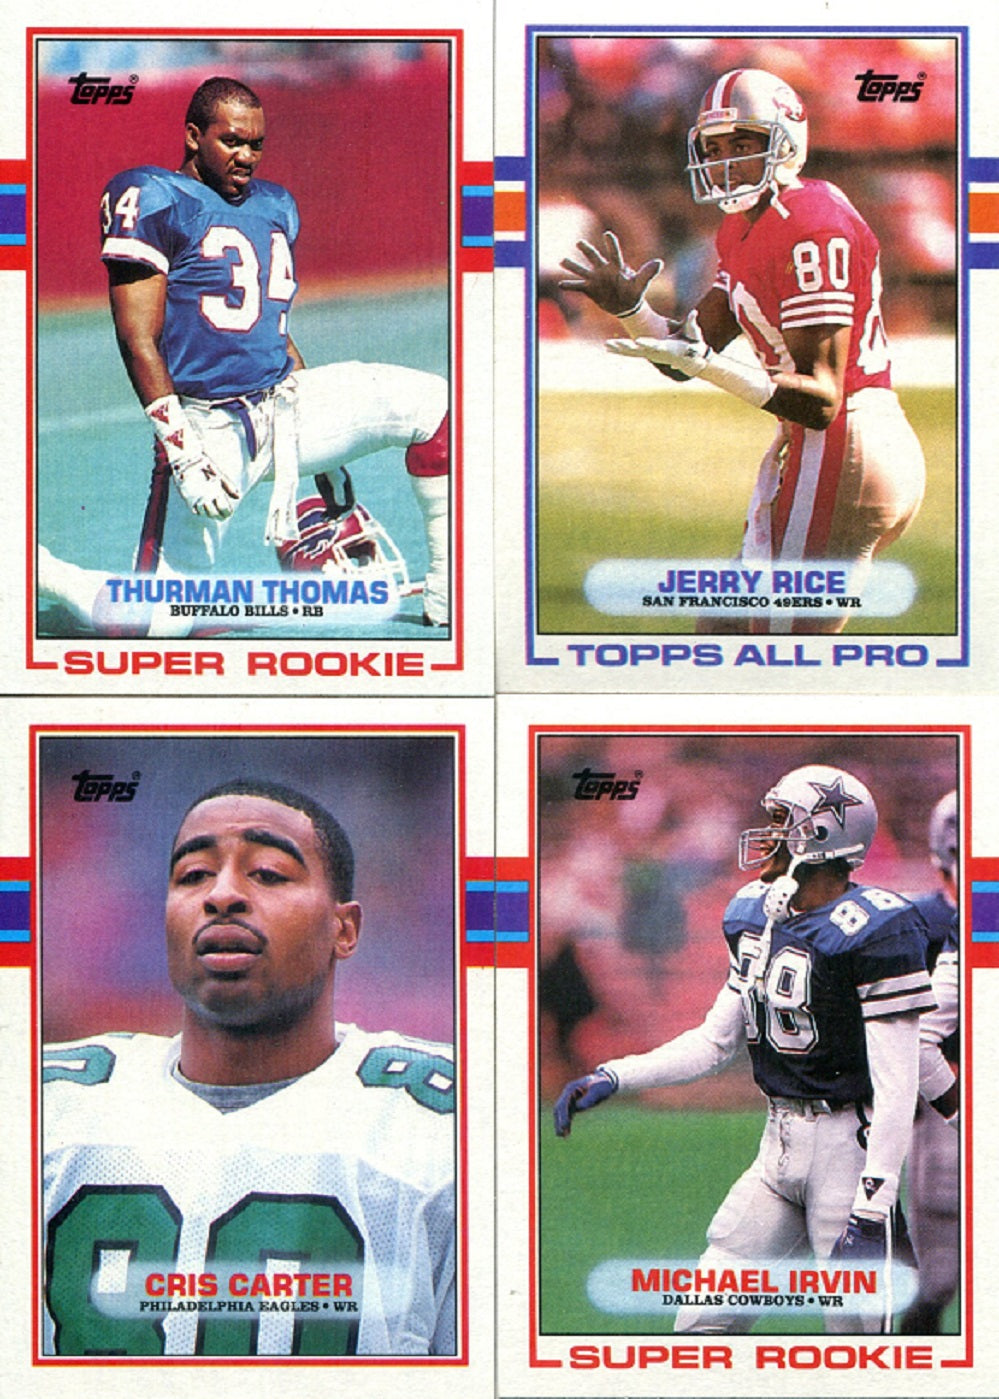 1989 Topps Football Complete Set NM/MT (396) (23-222)